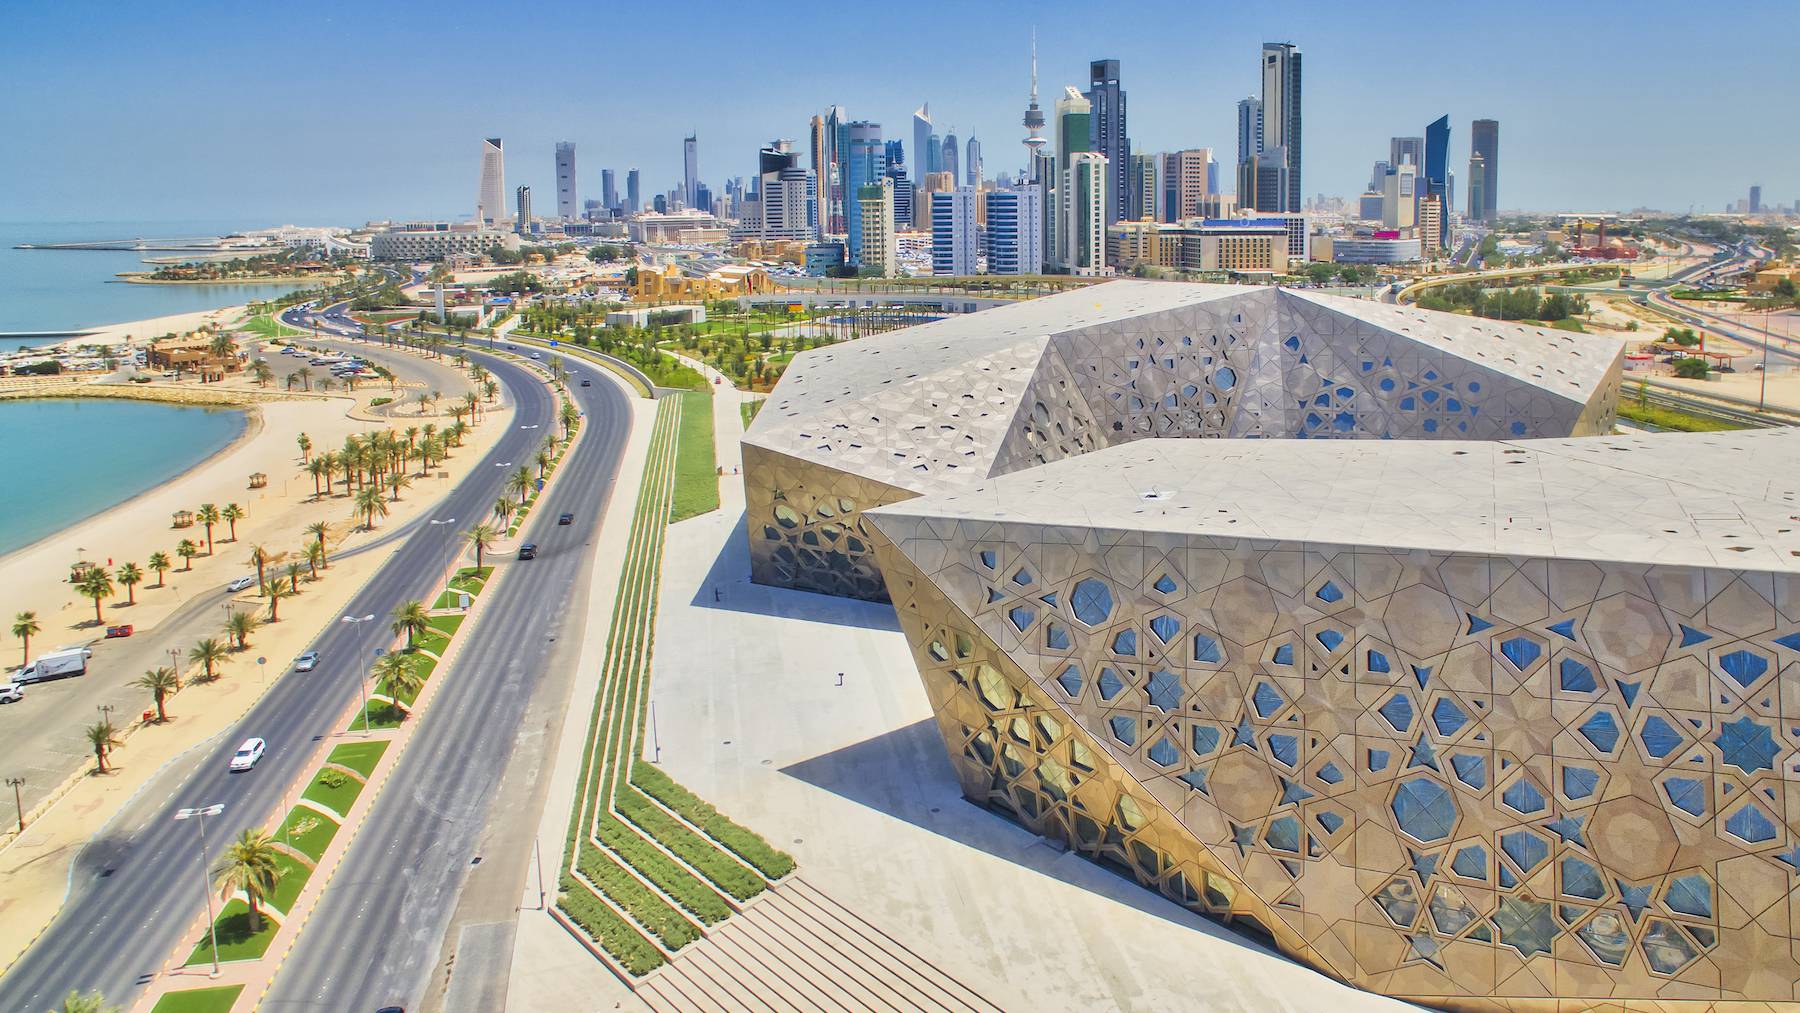 A view of Kuwait's Sheikh Jaber Al-Ahmad Cultural Centre and the city line.